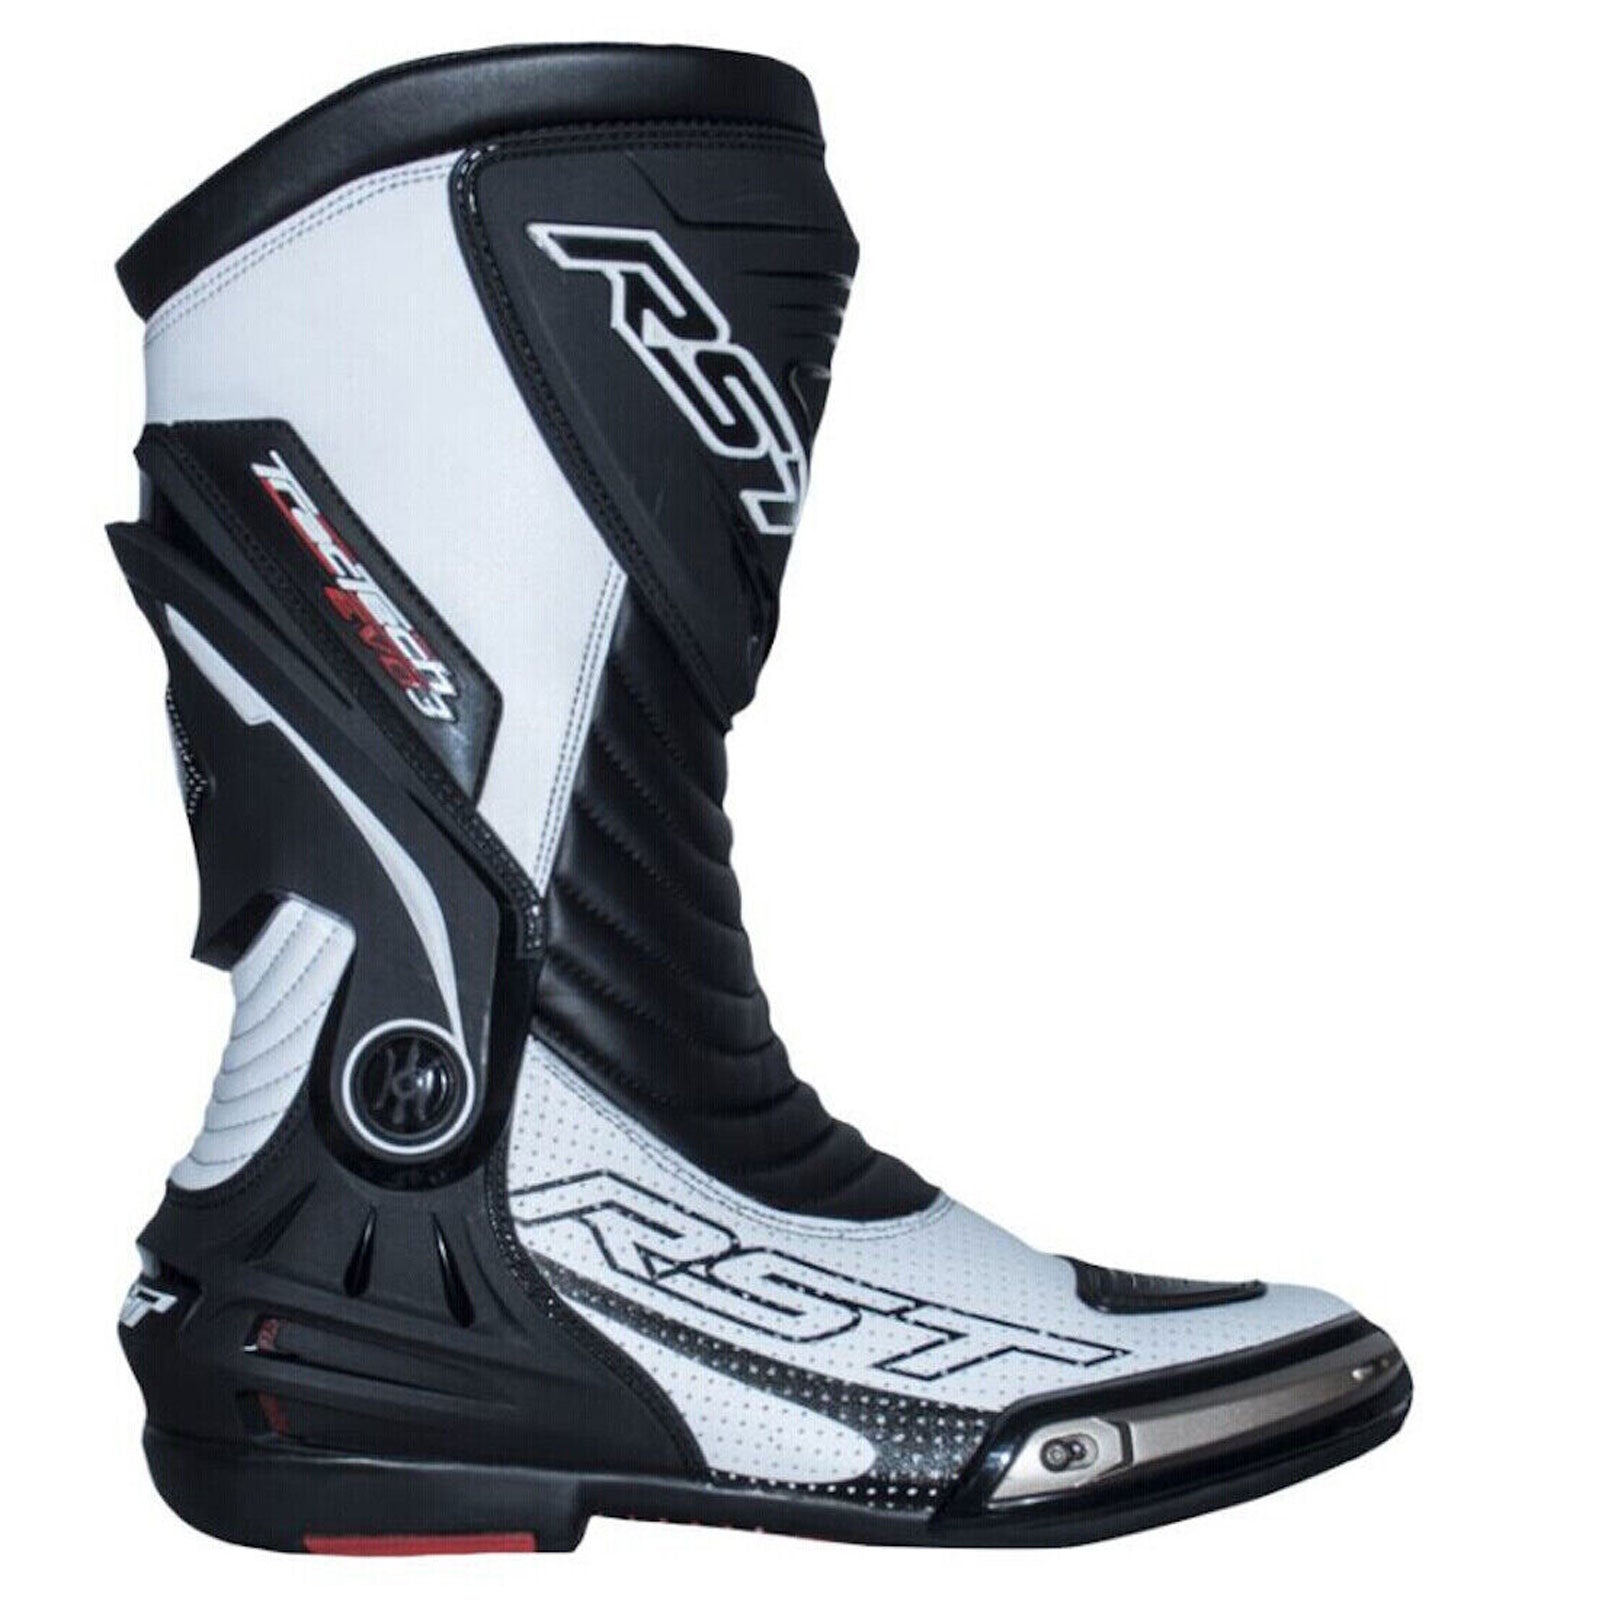 Rst Tractech Evo 3 Sports Motorcycle Boots Premium Quality Black White